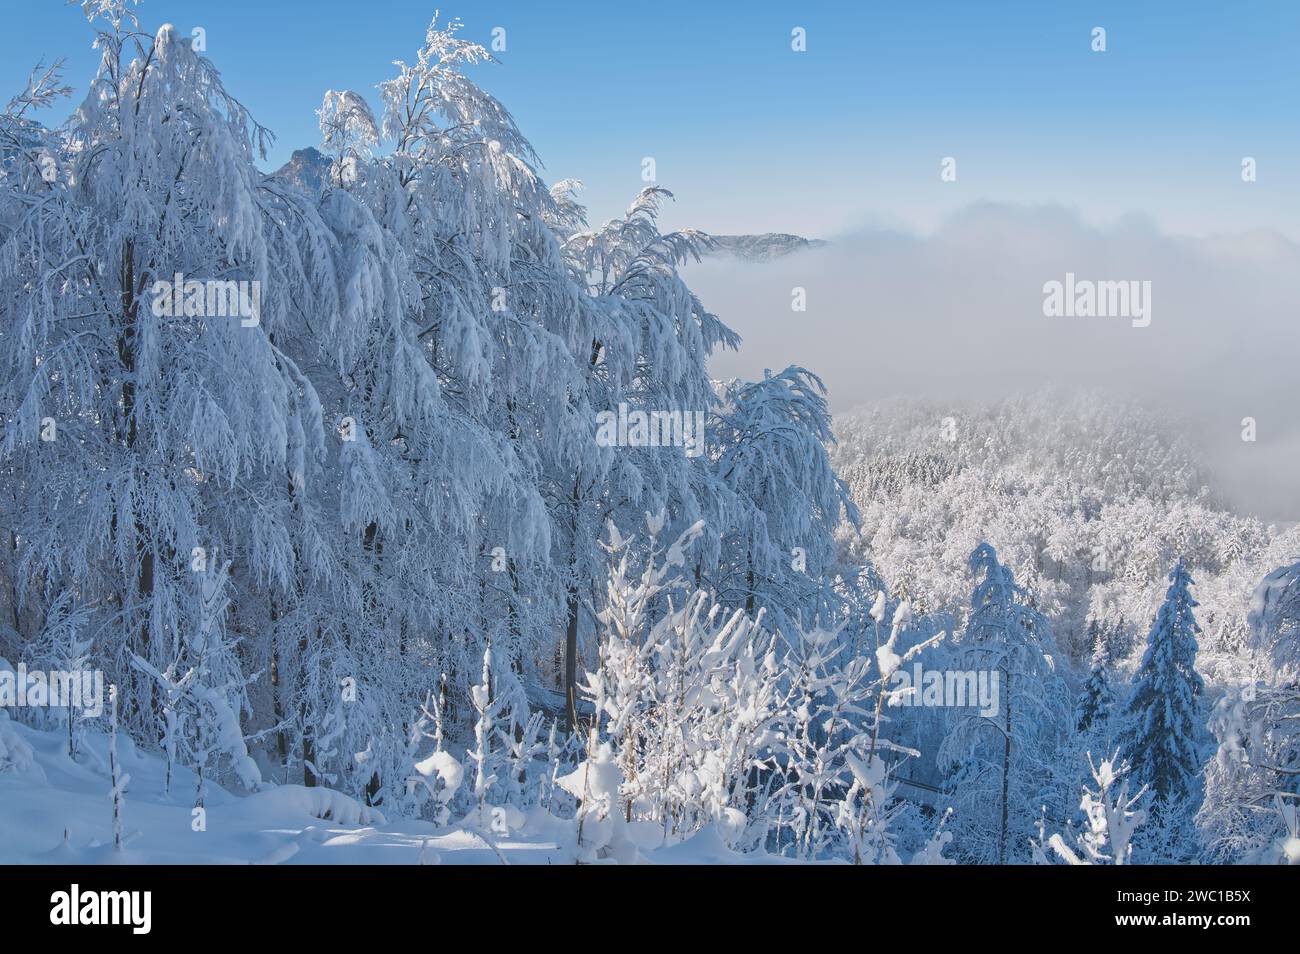 Snow covered trees in a winter landscape in Bavaria near the Alps Stock Photo